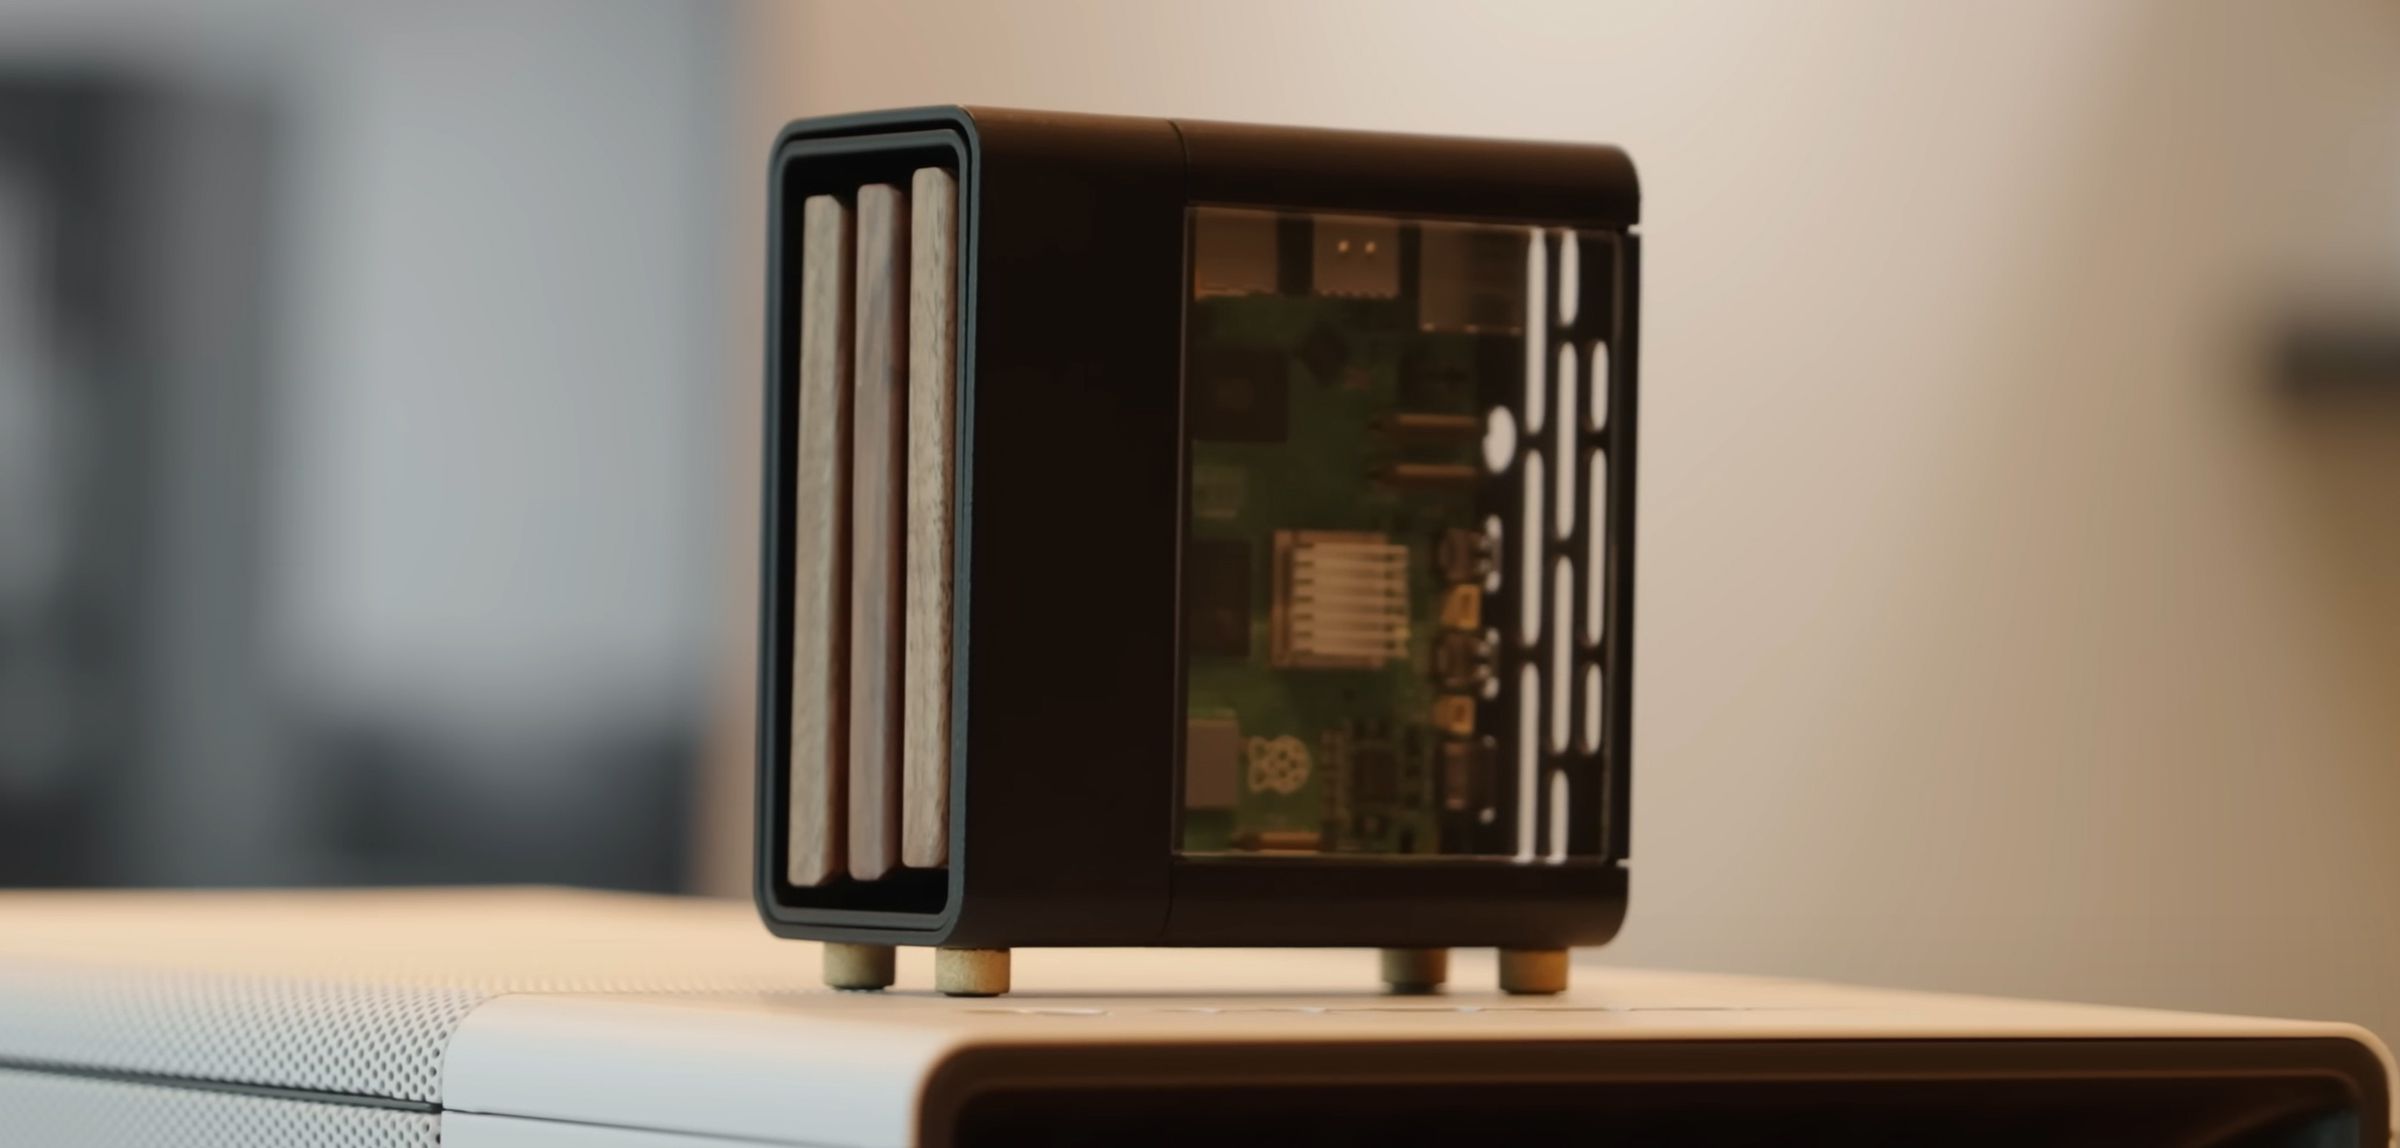 A miniature PC case with wood paneling on the front.